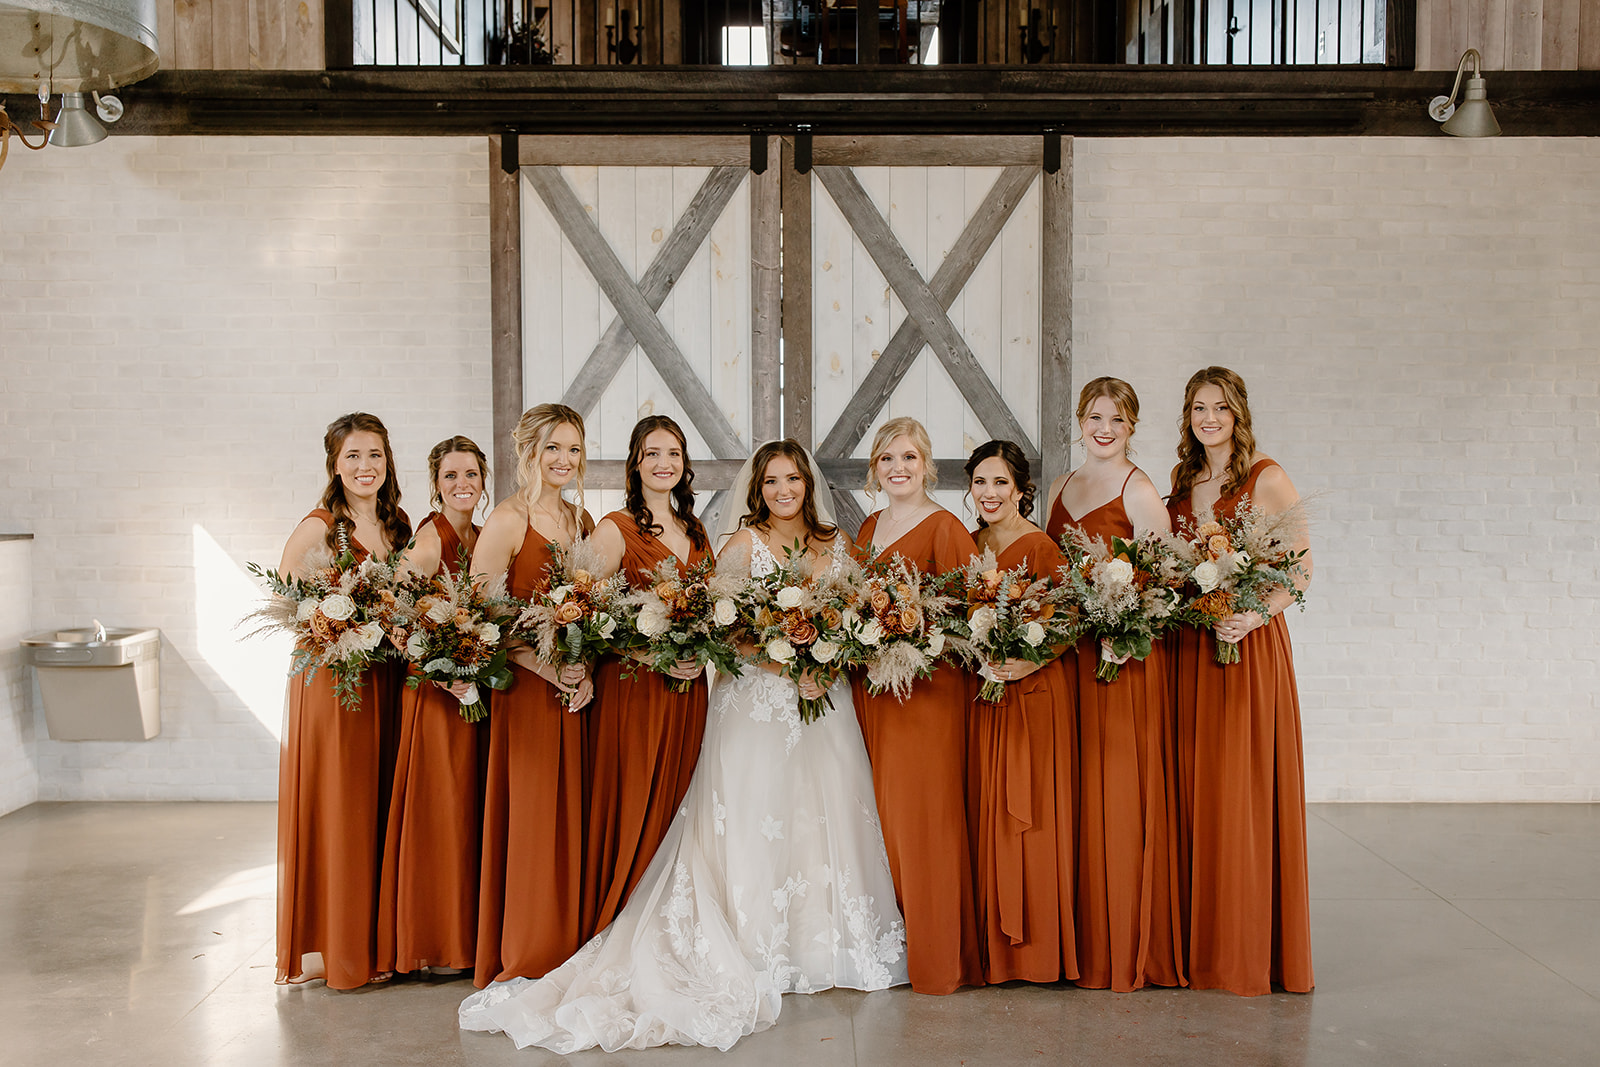 Bride and bridesmaids stand in front of a barn door